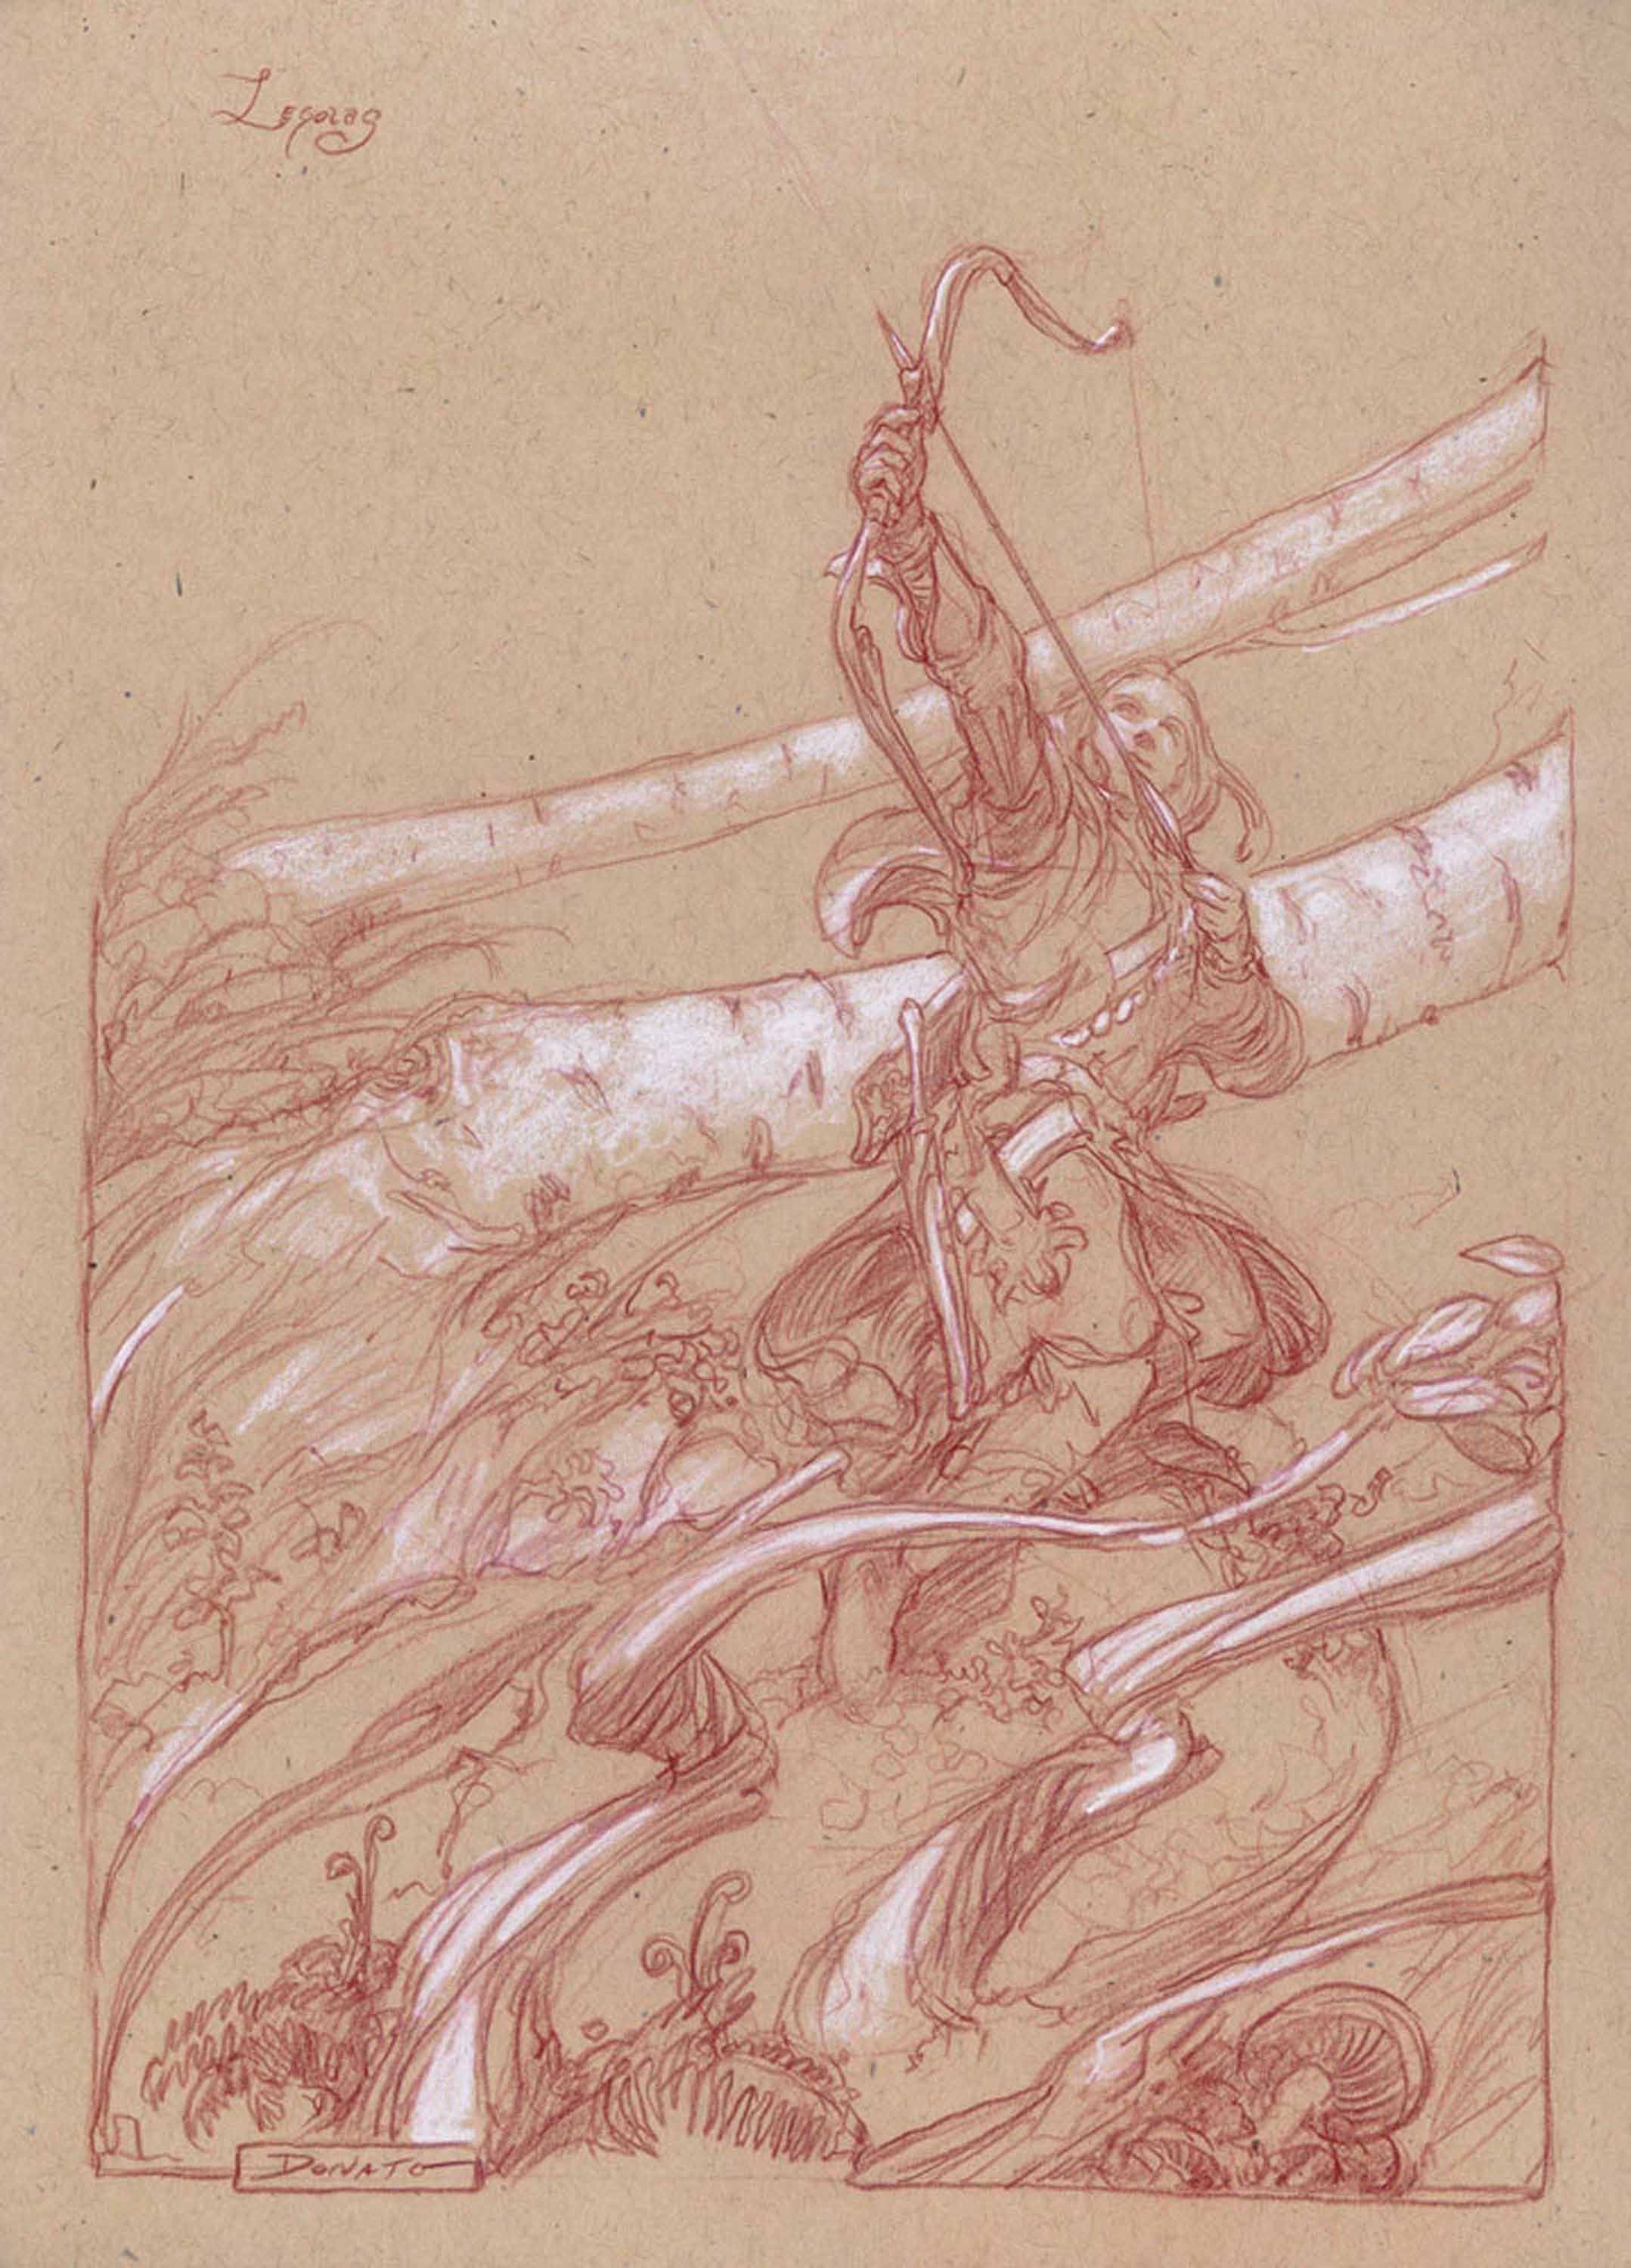 Legolas - Banks of the Anduin
11" x 8"  Watercolor Pencil and Chalk on Toned paper 2012
private collection